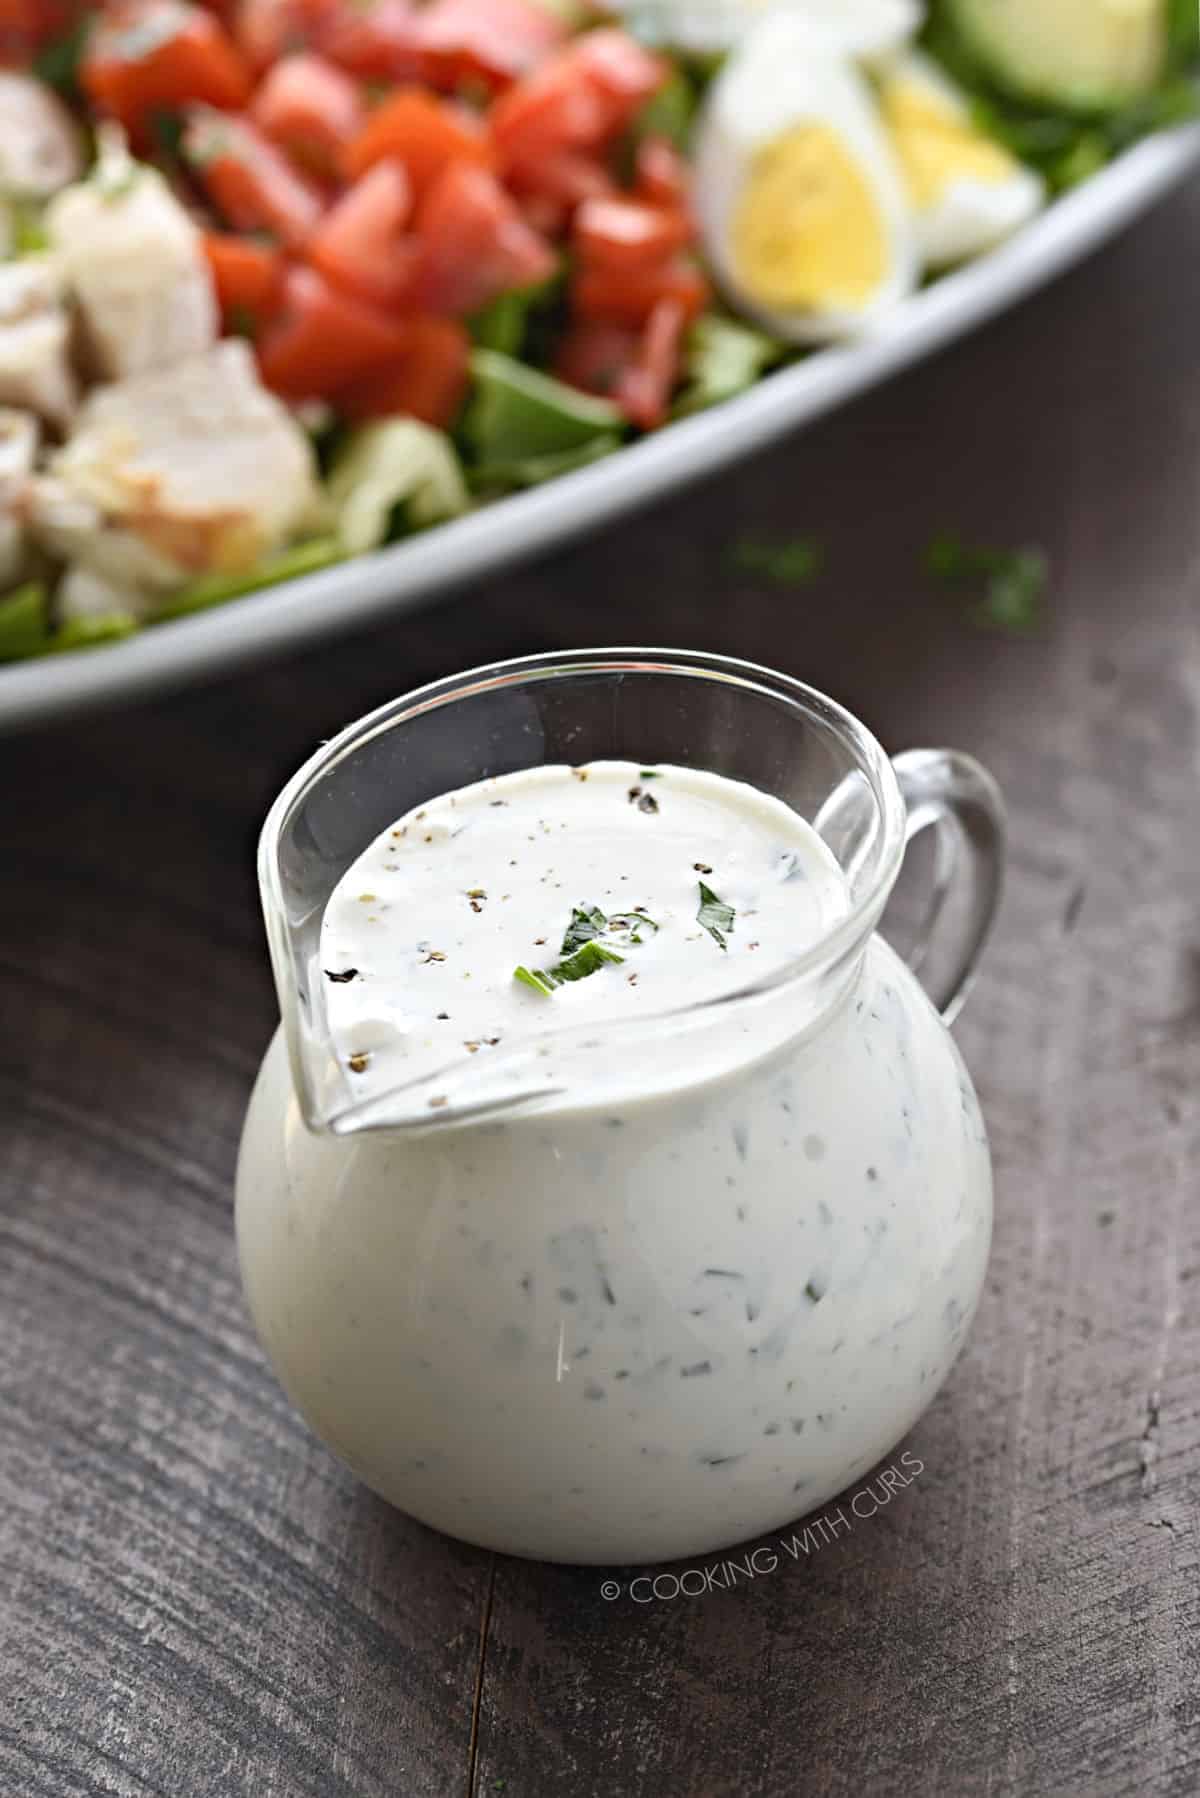 Homemade ranch dressing in a small glass pitcher with a classic cobb salad in the background.